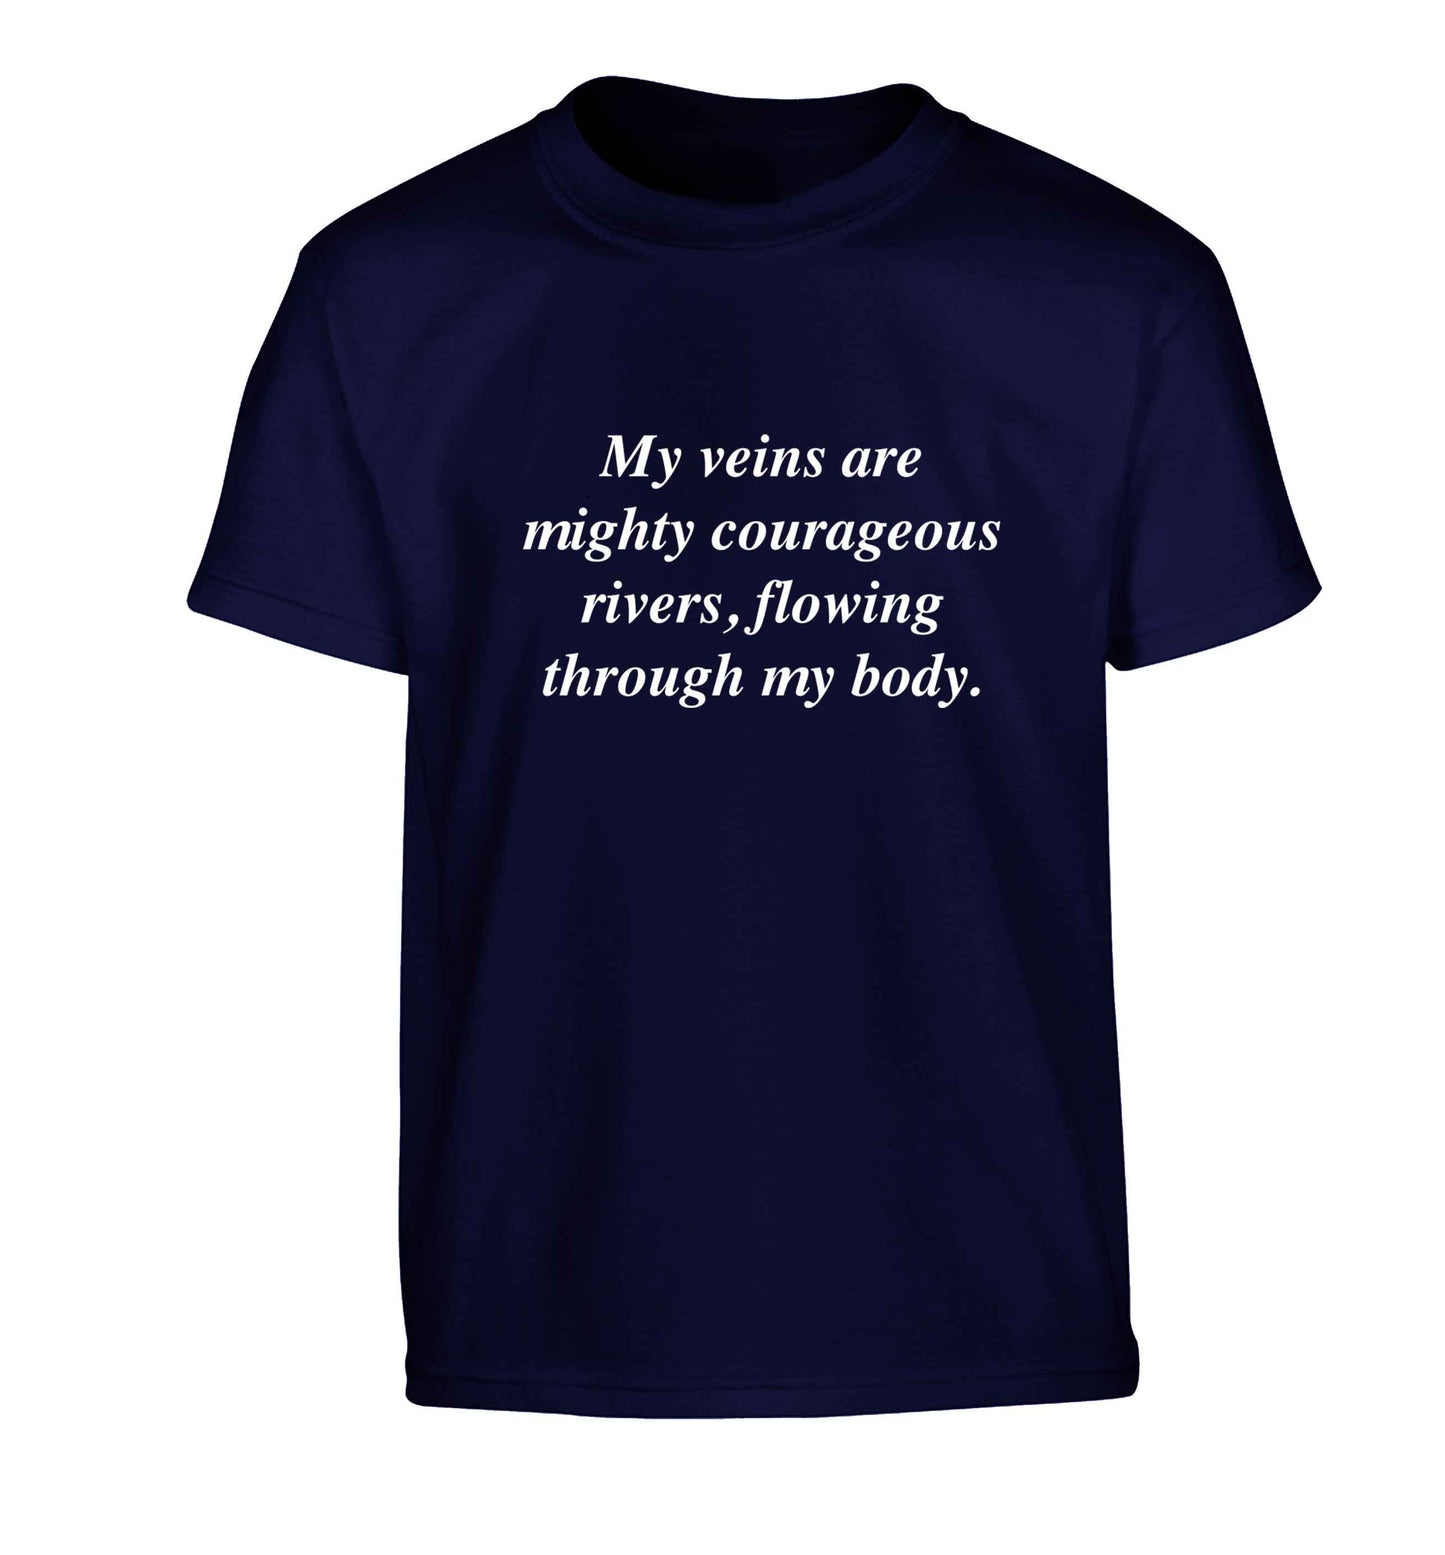 My veins are mighty courageous rivers, flowing through my body Children's navy Tshirt 12-13 Years